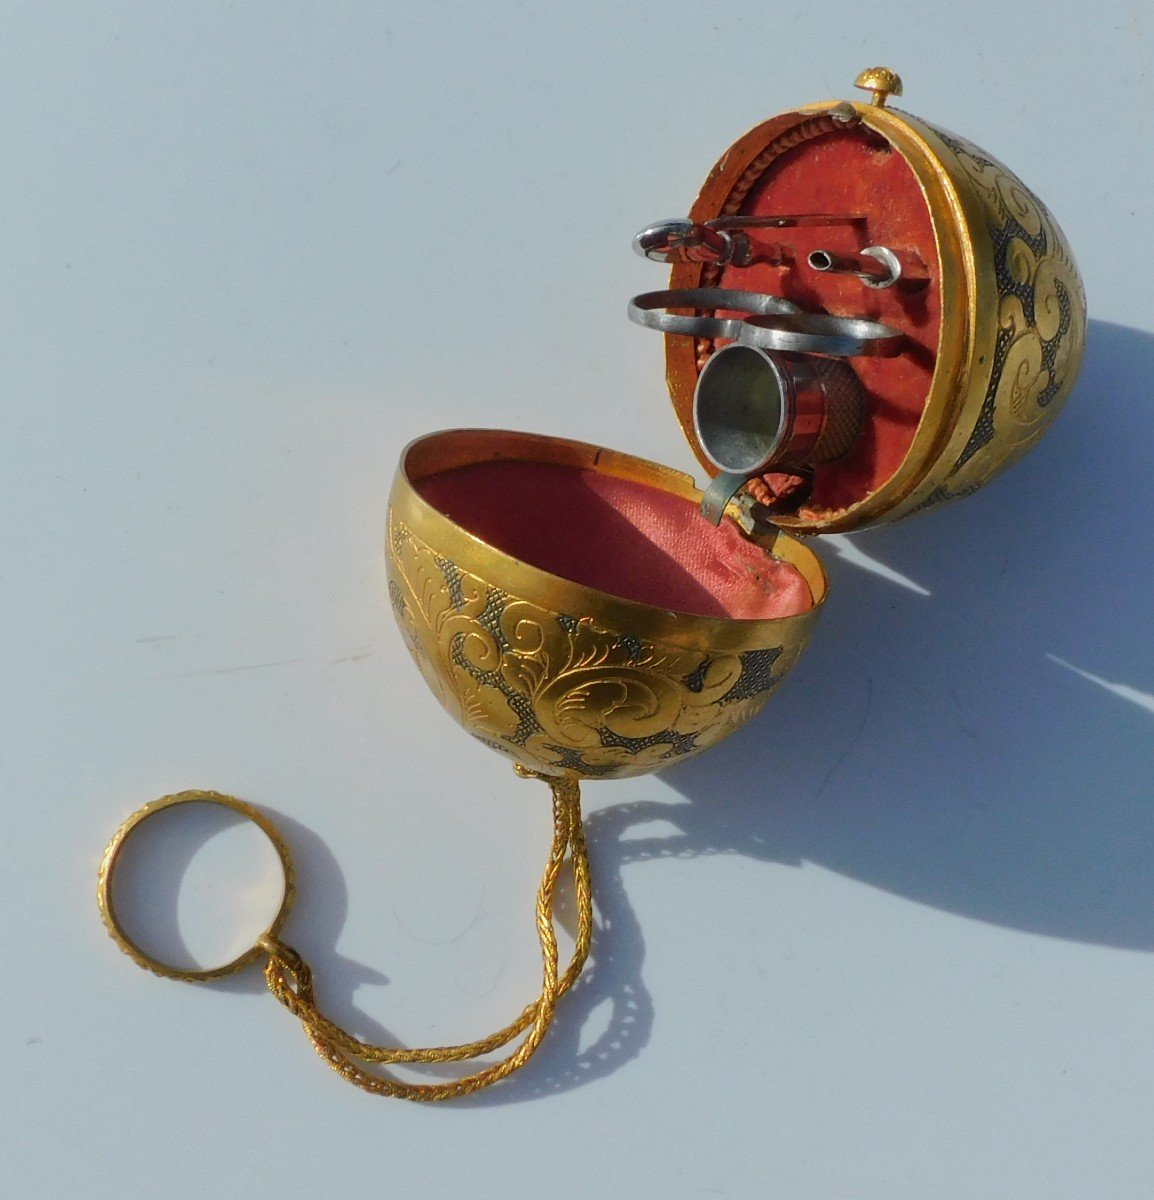 Miniature Steel Sewing Kit In A Golden Metal Egg-shaped Box-photo-4